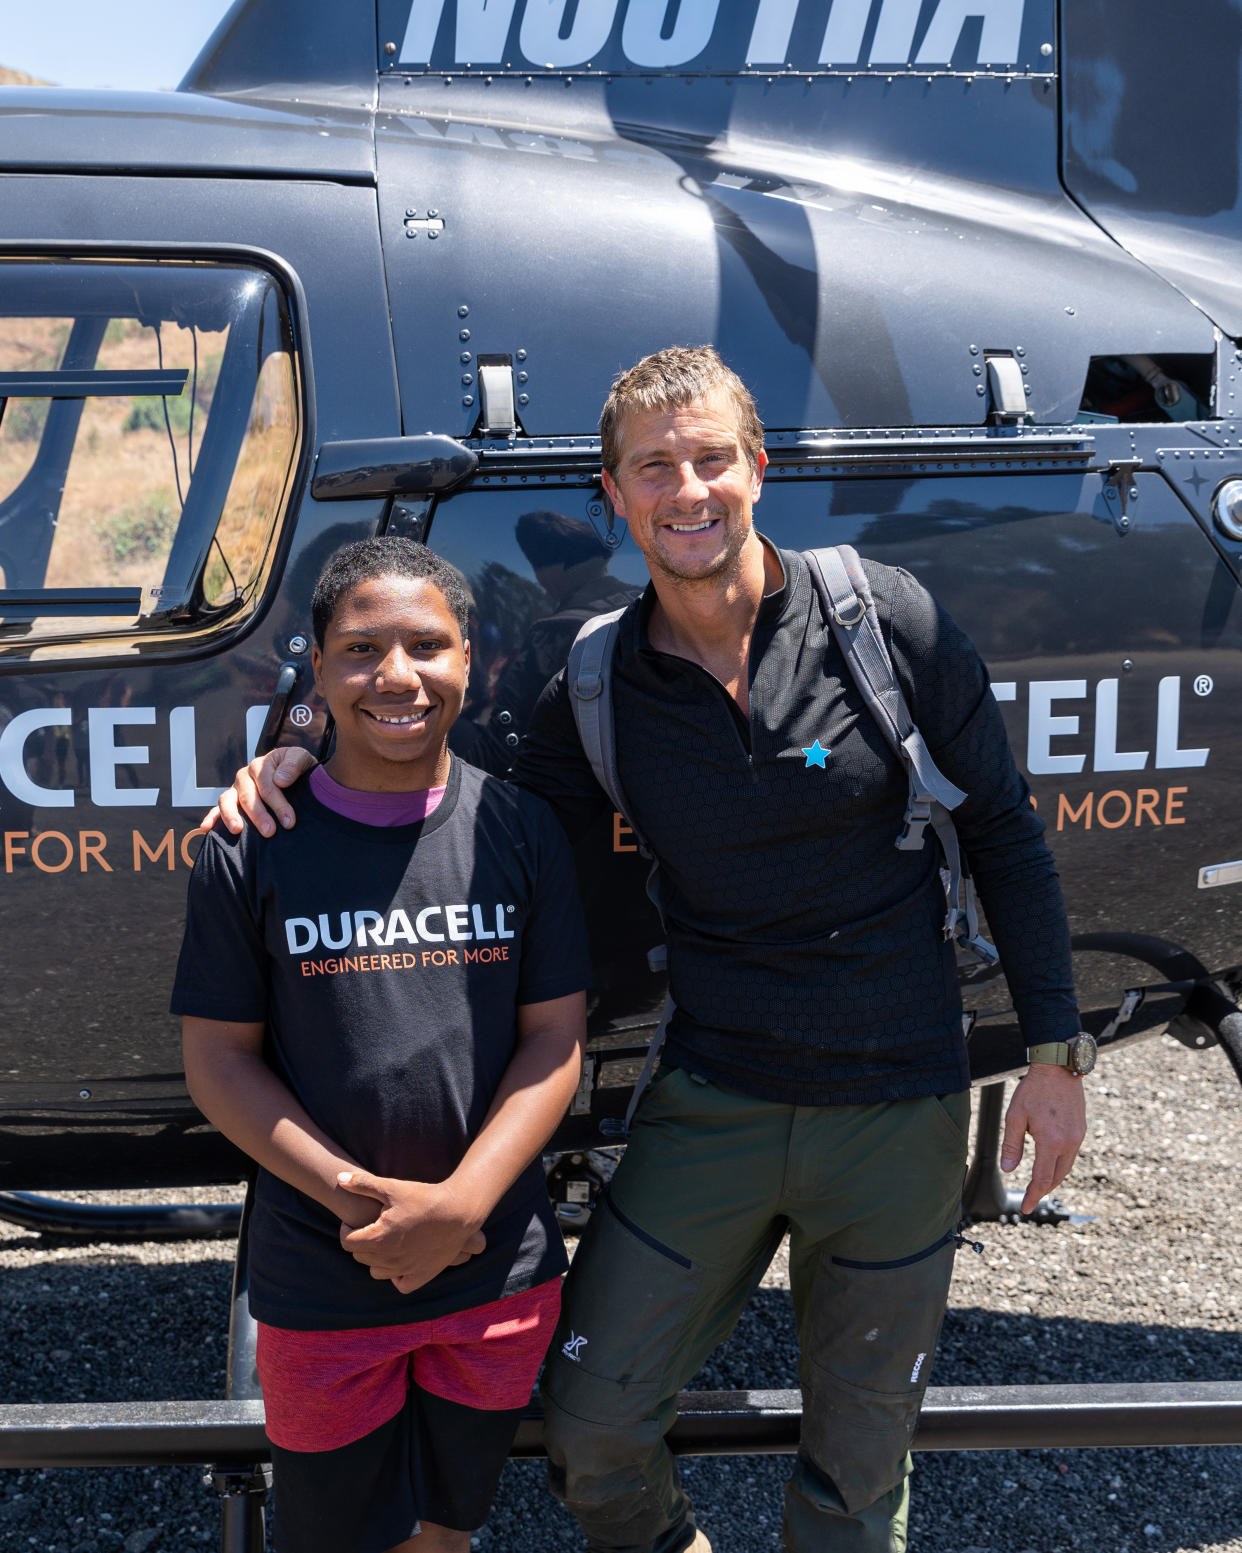 Grylls with Cameron, a boy whose Make-A-Wish Foundation dream was to go on an adventure with the 48-year-old survivalist. (Photo: Duracell)